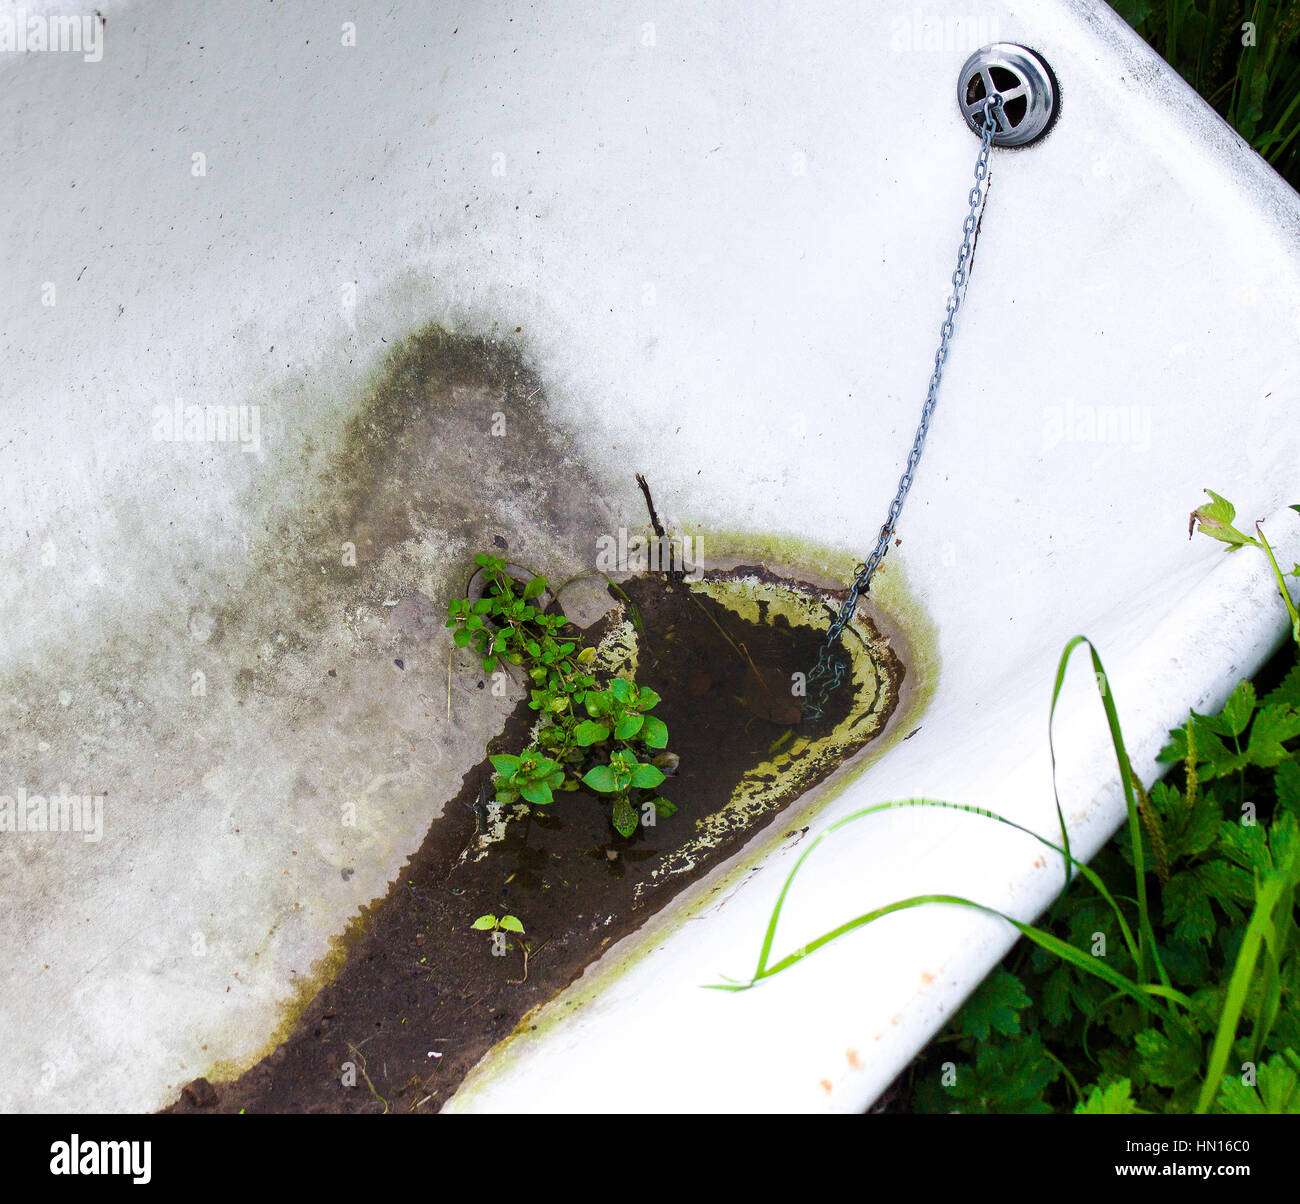 Old bath.Dirty old bath tub abandoned in a field and recycled as a drinking trough for cattle. Stock Photo